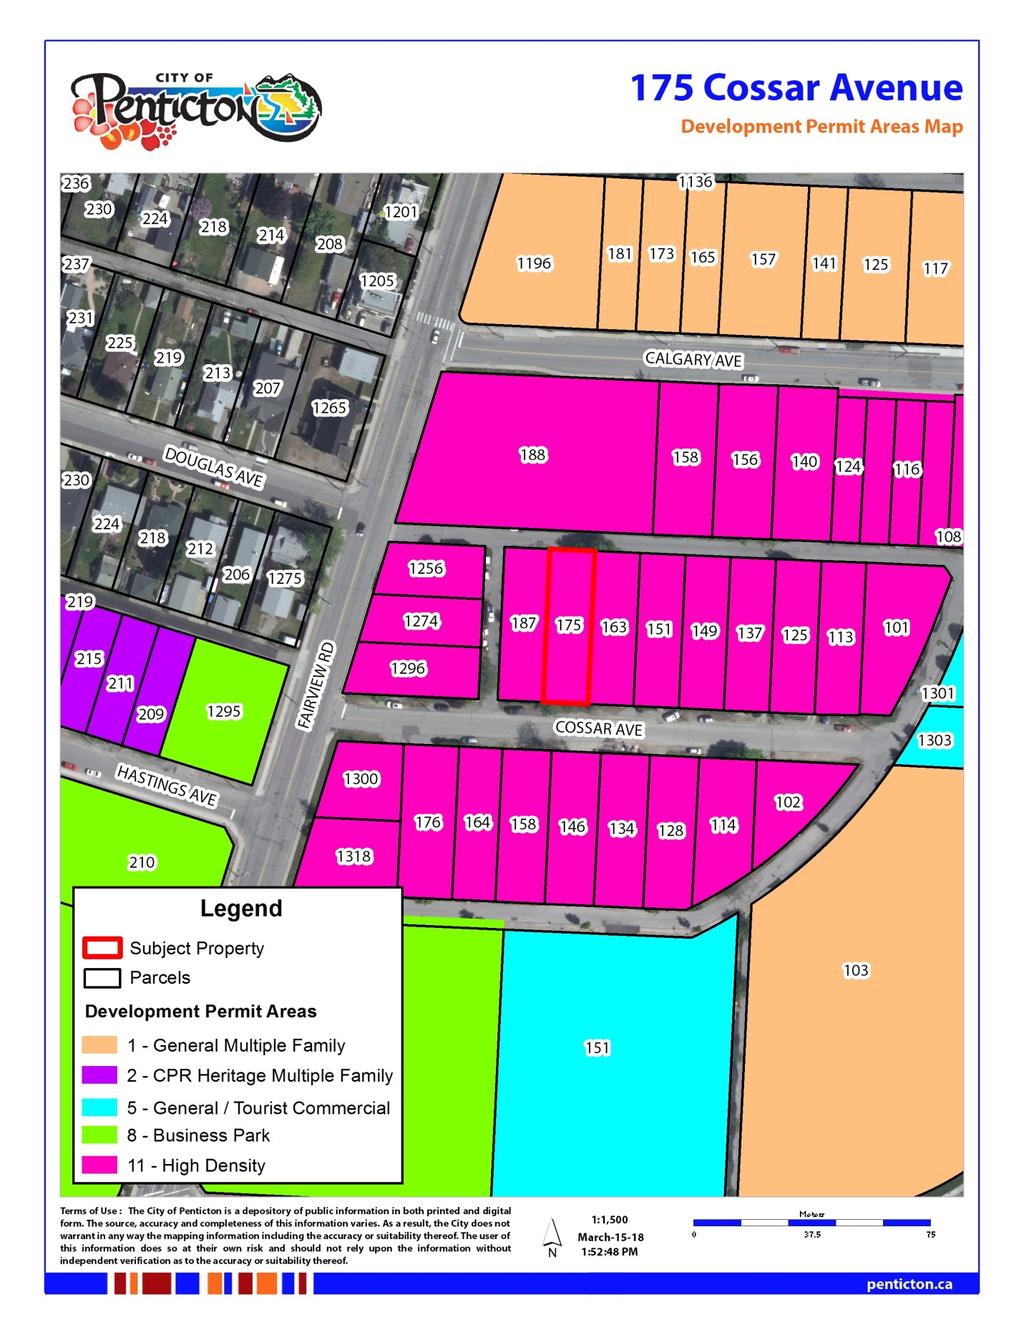 Attachment D Development Permit Area Map Figure 4 Subject Property Currently